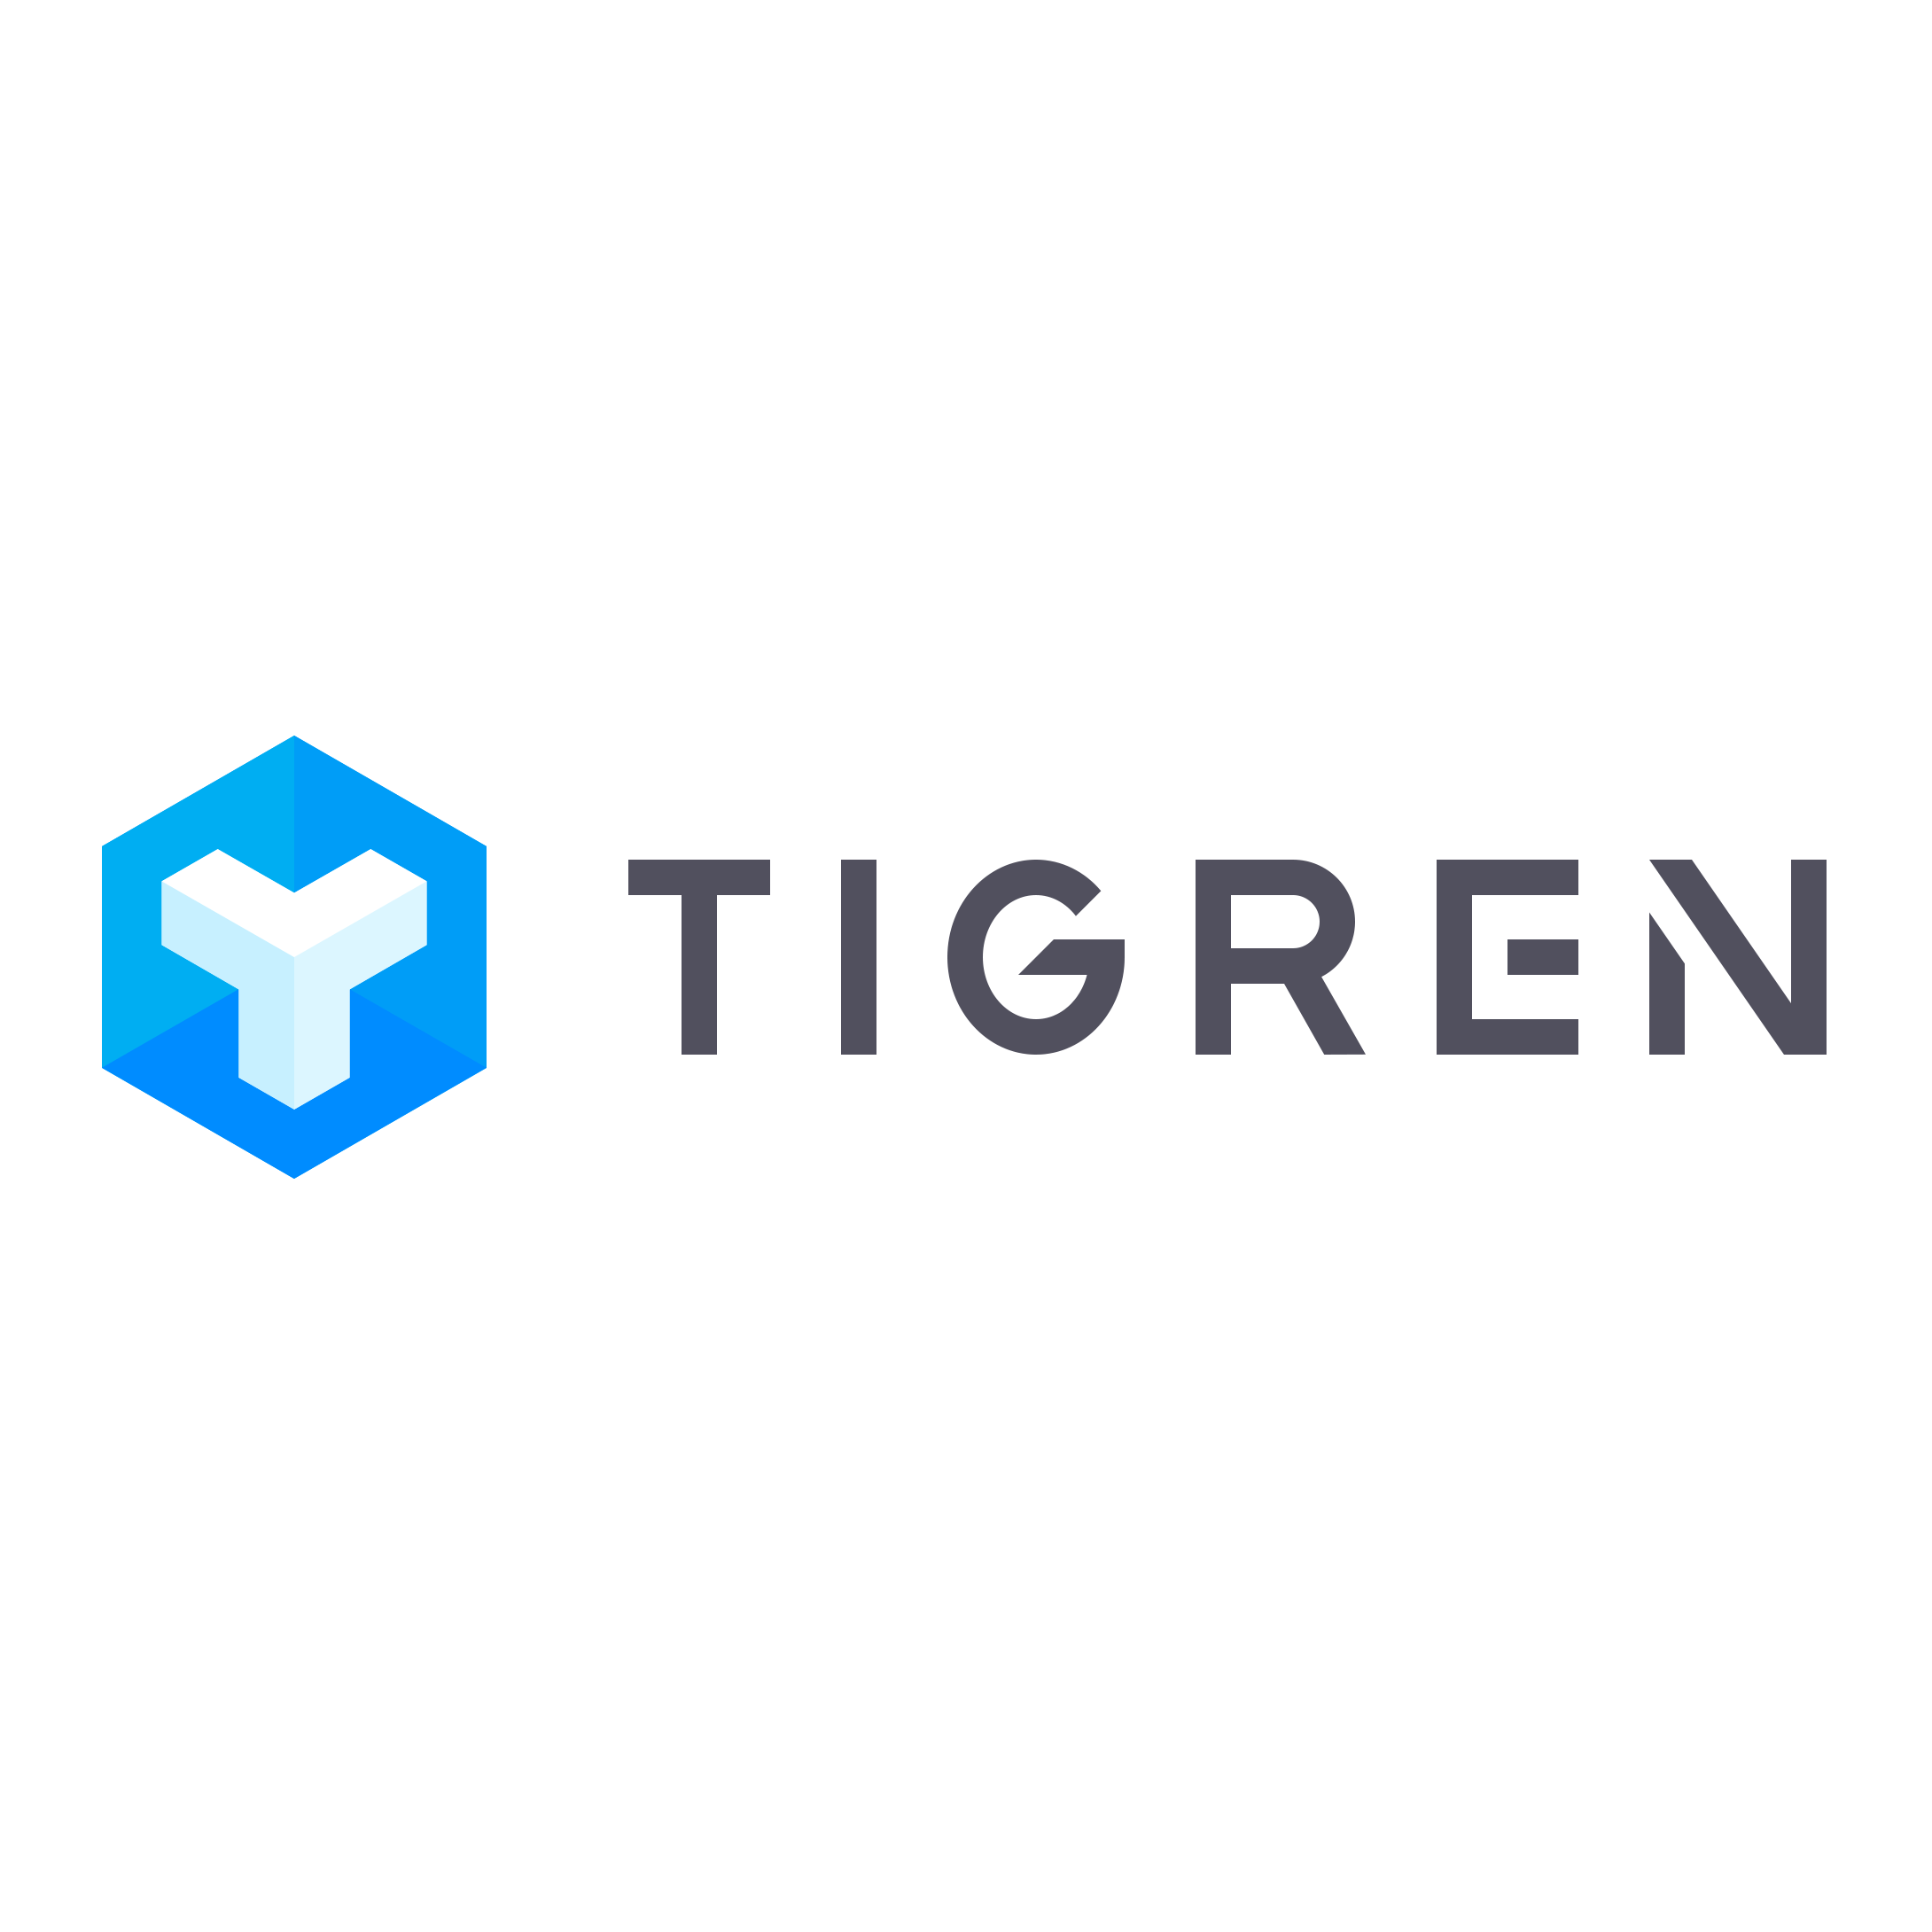 Tigren E-commerce Solutions profile on Qualified.One